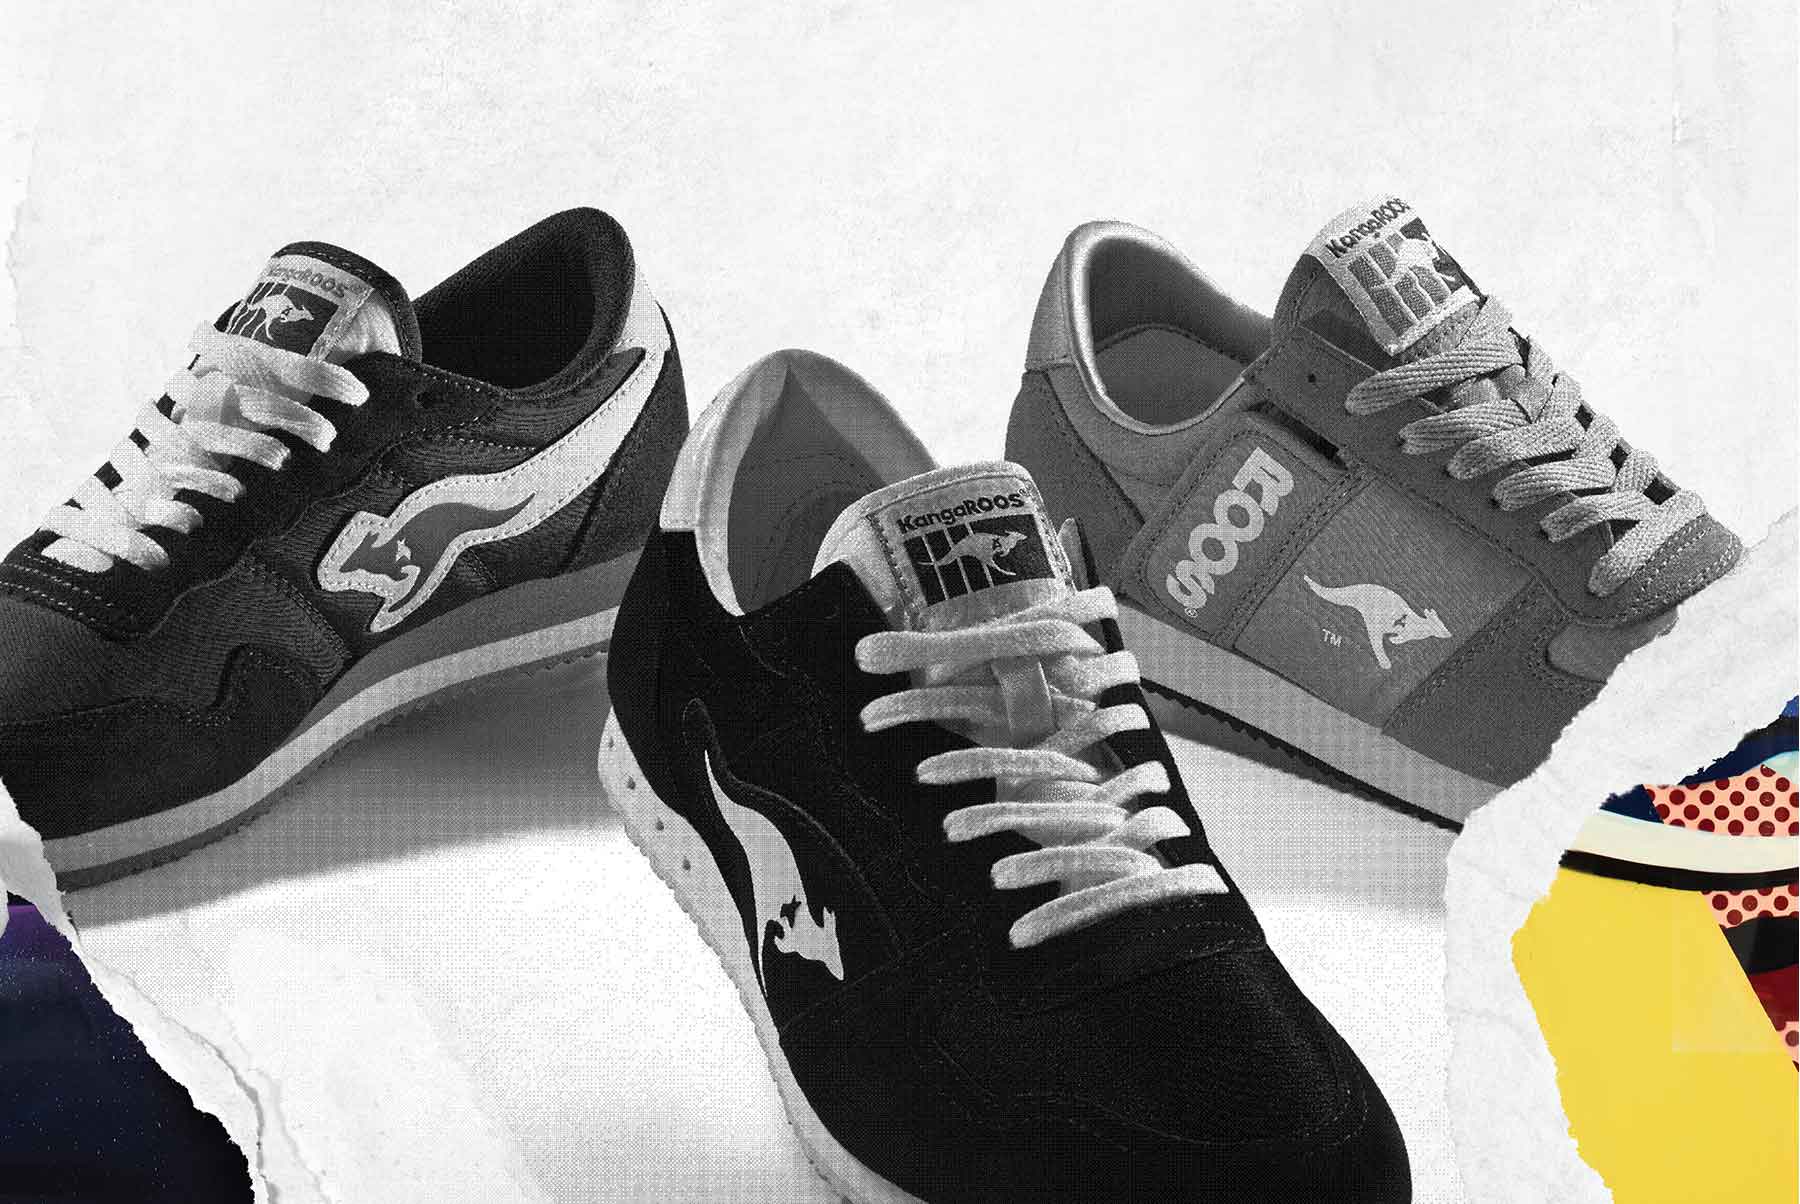 KangaROOS - The Original Shoes with Pockets